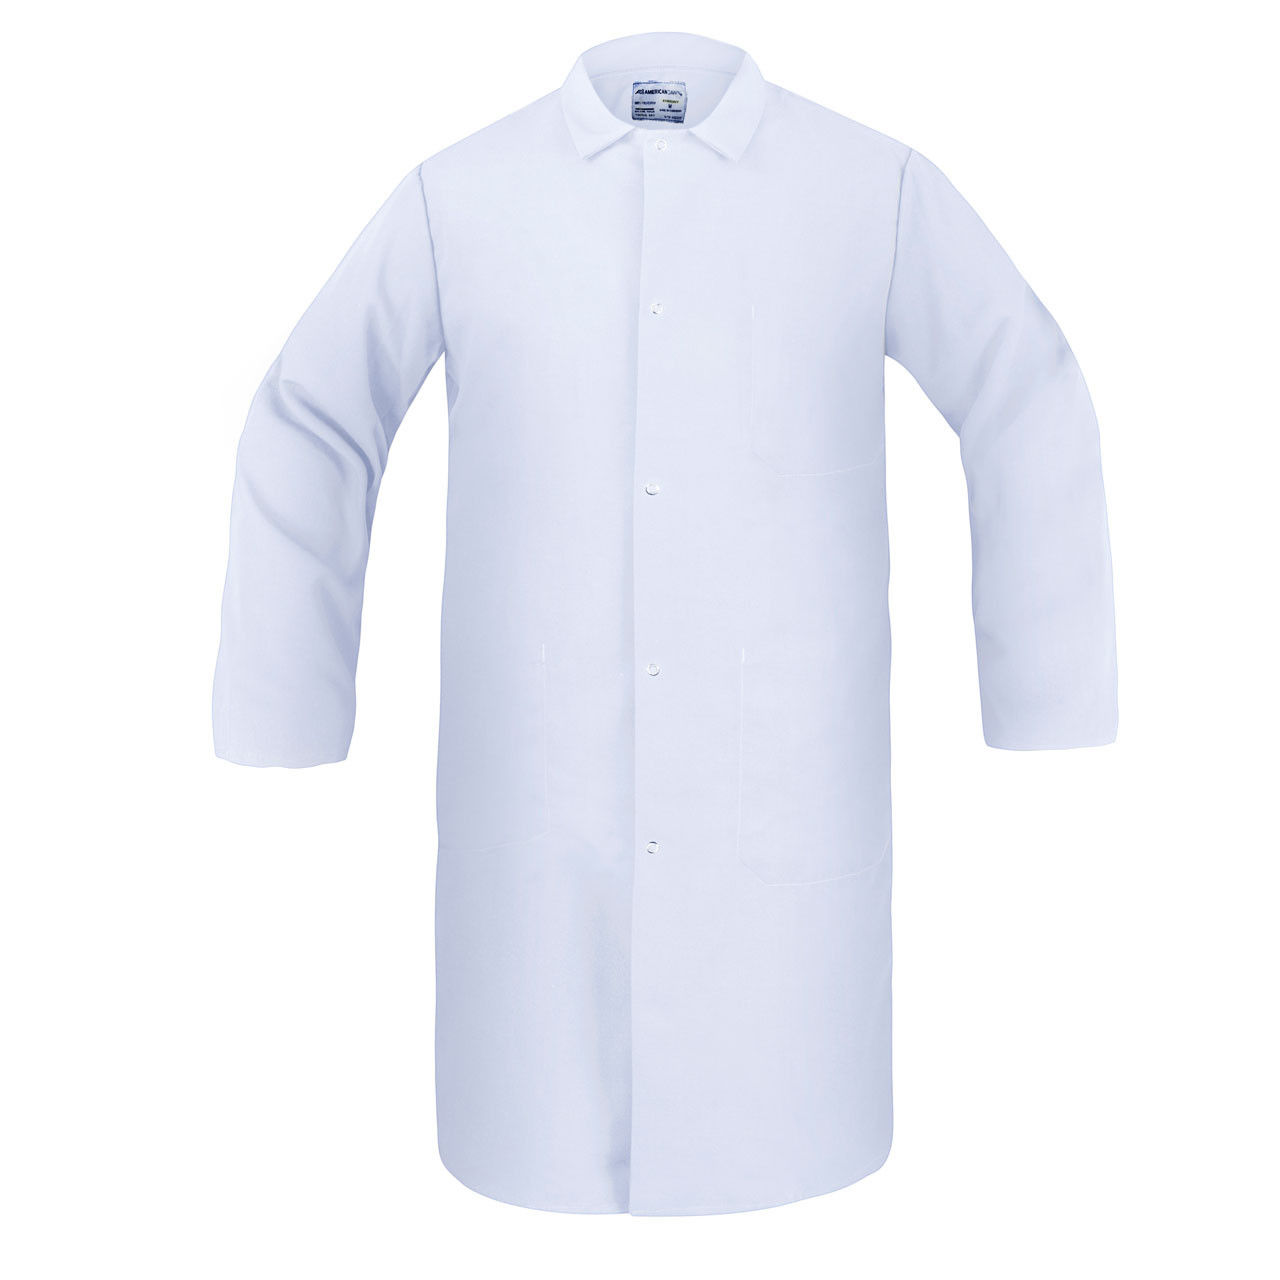 Does the butcher frock in white fit a 32-34 waist size?